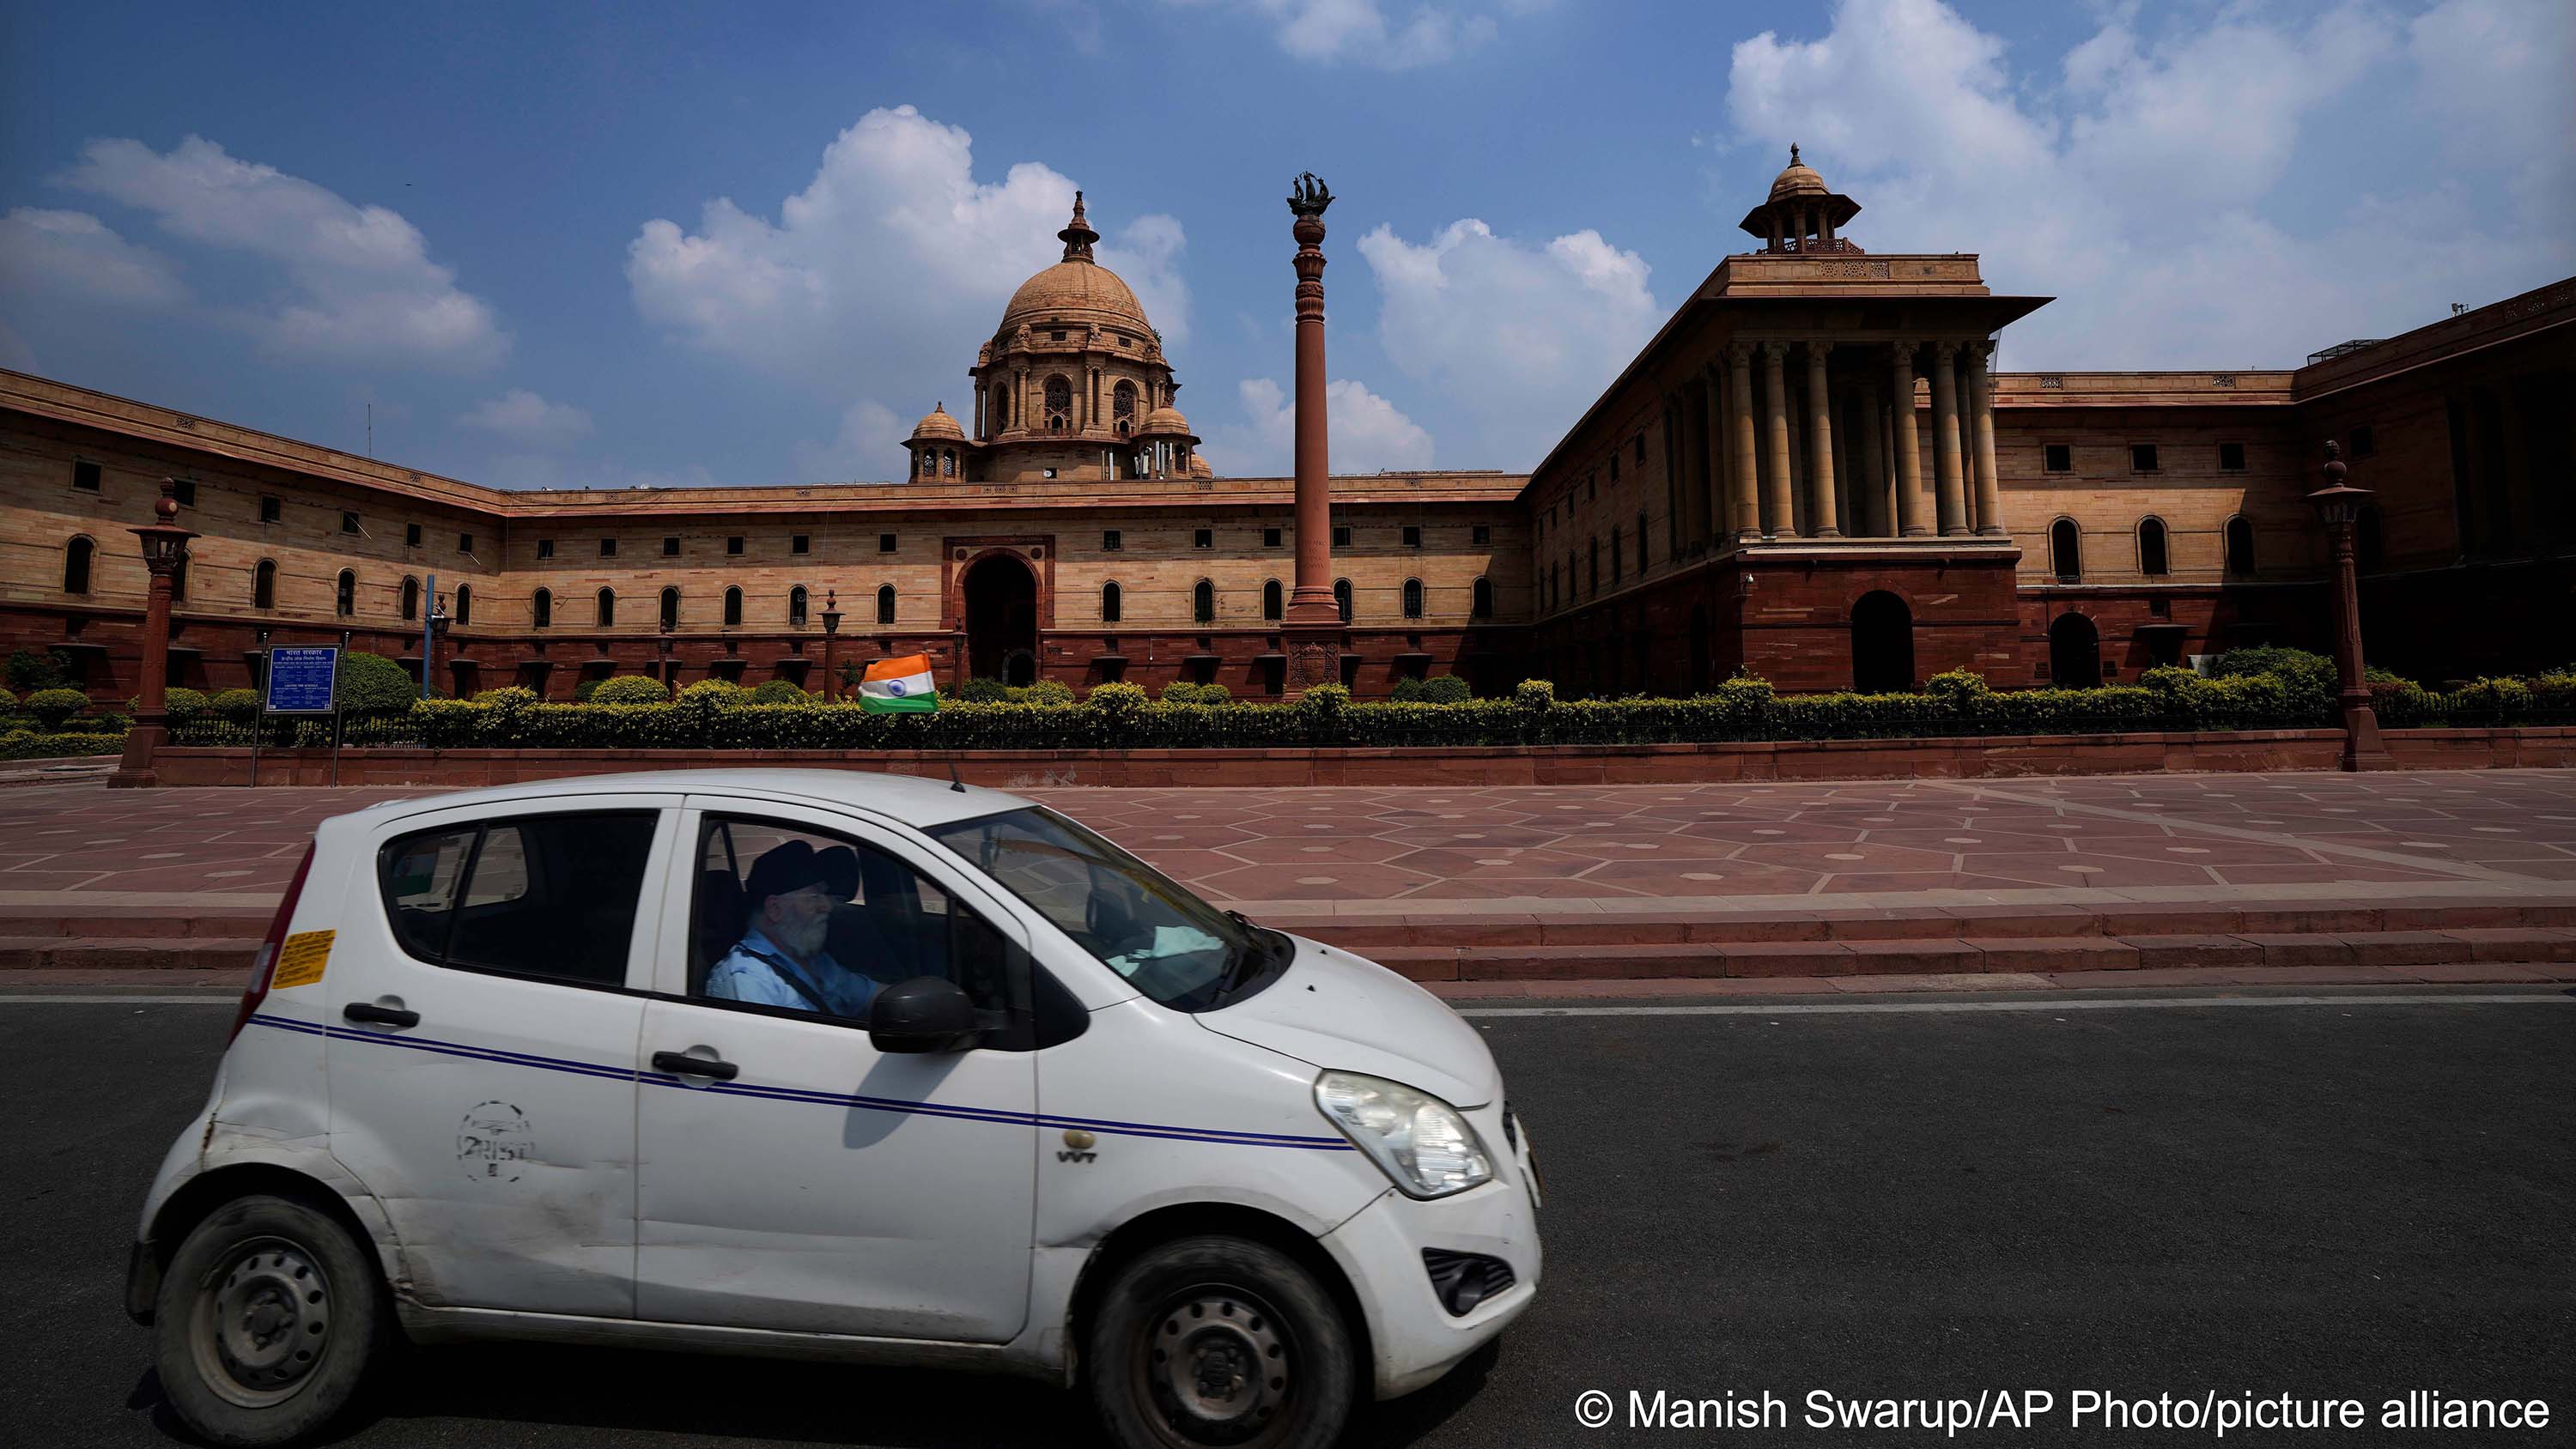 A taxi carrying the national flag drives past a colonial building which houses important ministries in New Delhi, India, 11 September 2022 (photo: AP Photo/Manish Swarup)